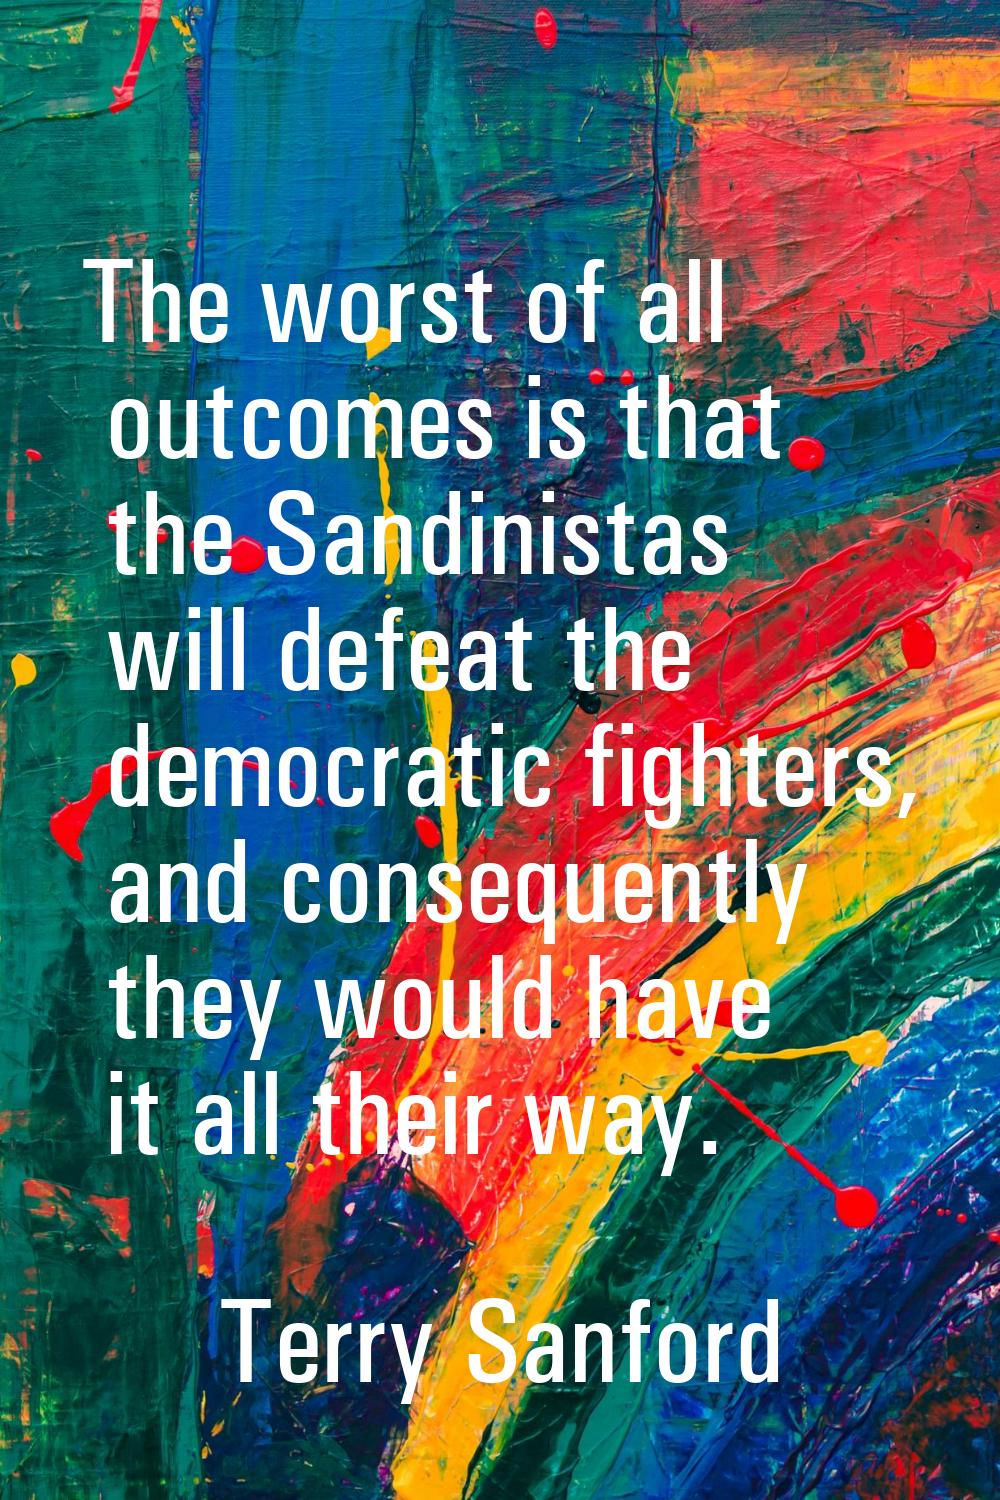 The worst of all outcomes is that the Sandinistas will defeat the democratic fighters, and conseque